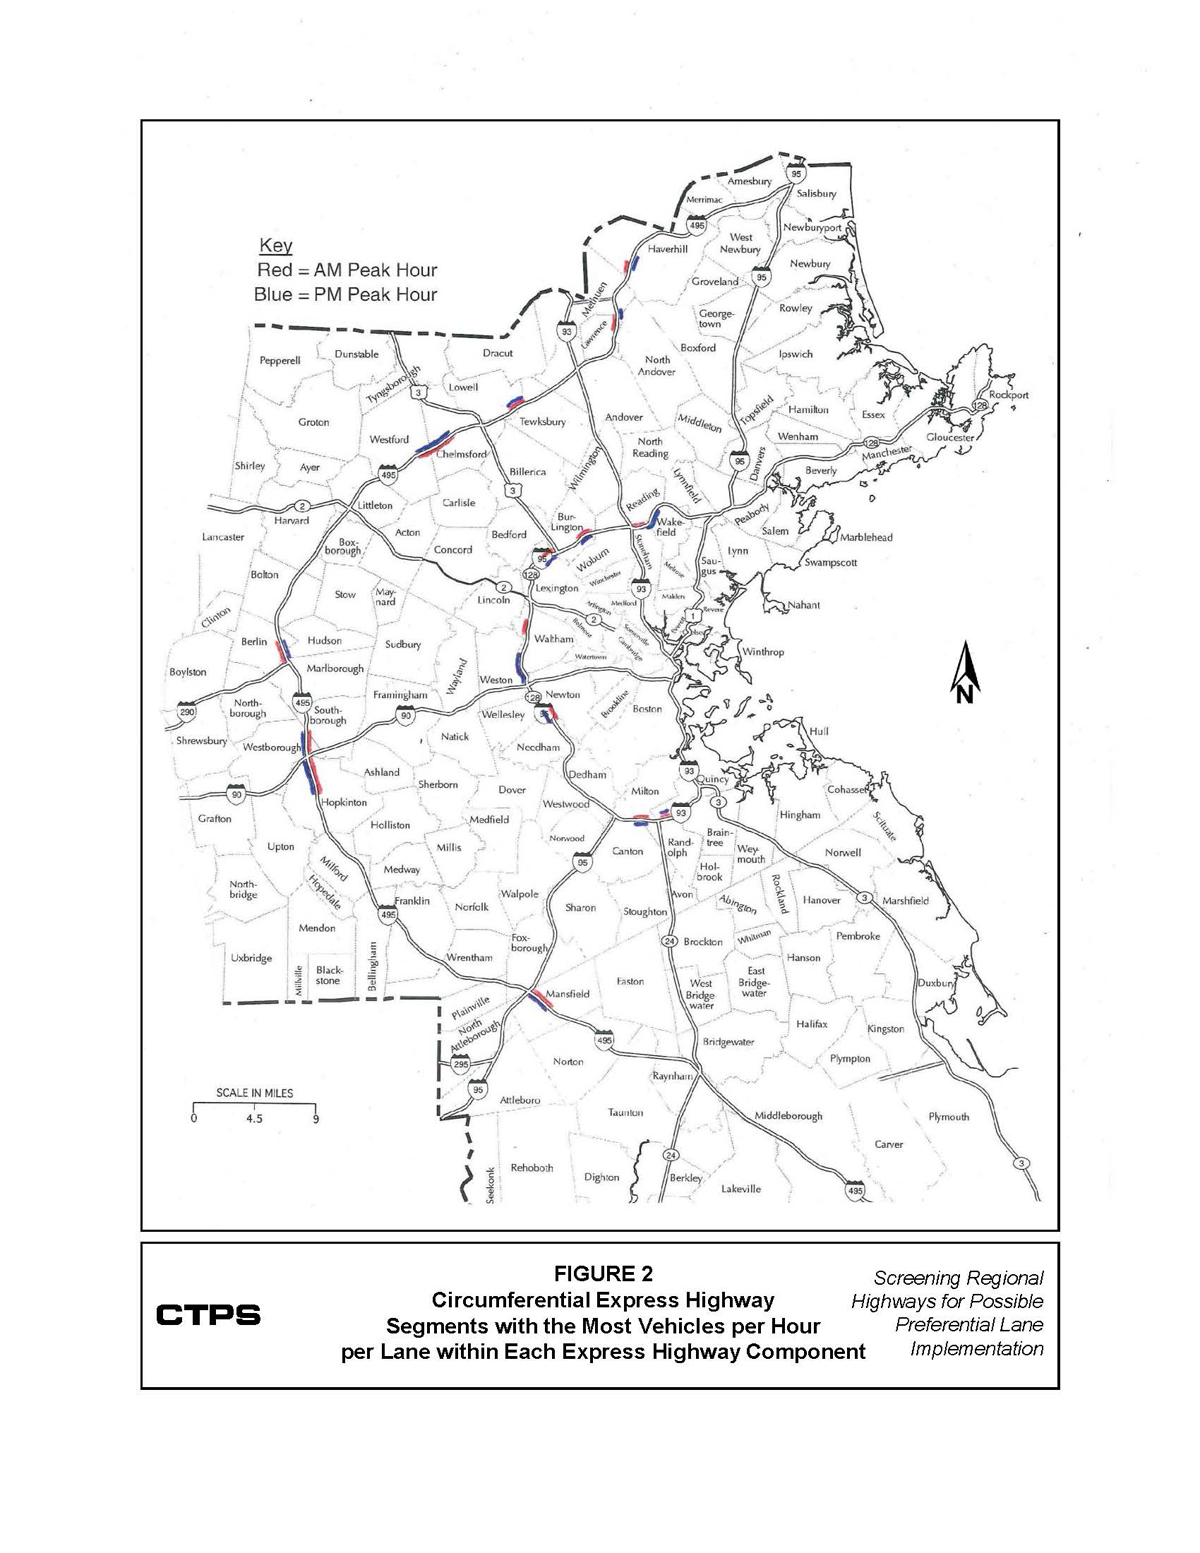 Figure 2 is a map of eastern Massachusetts. There are a total of 26 circumferential express highway system components. Within each of these components both the most congested AM segment and the most congested PM segment are highlighted.